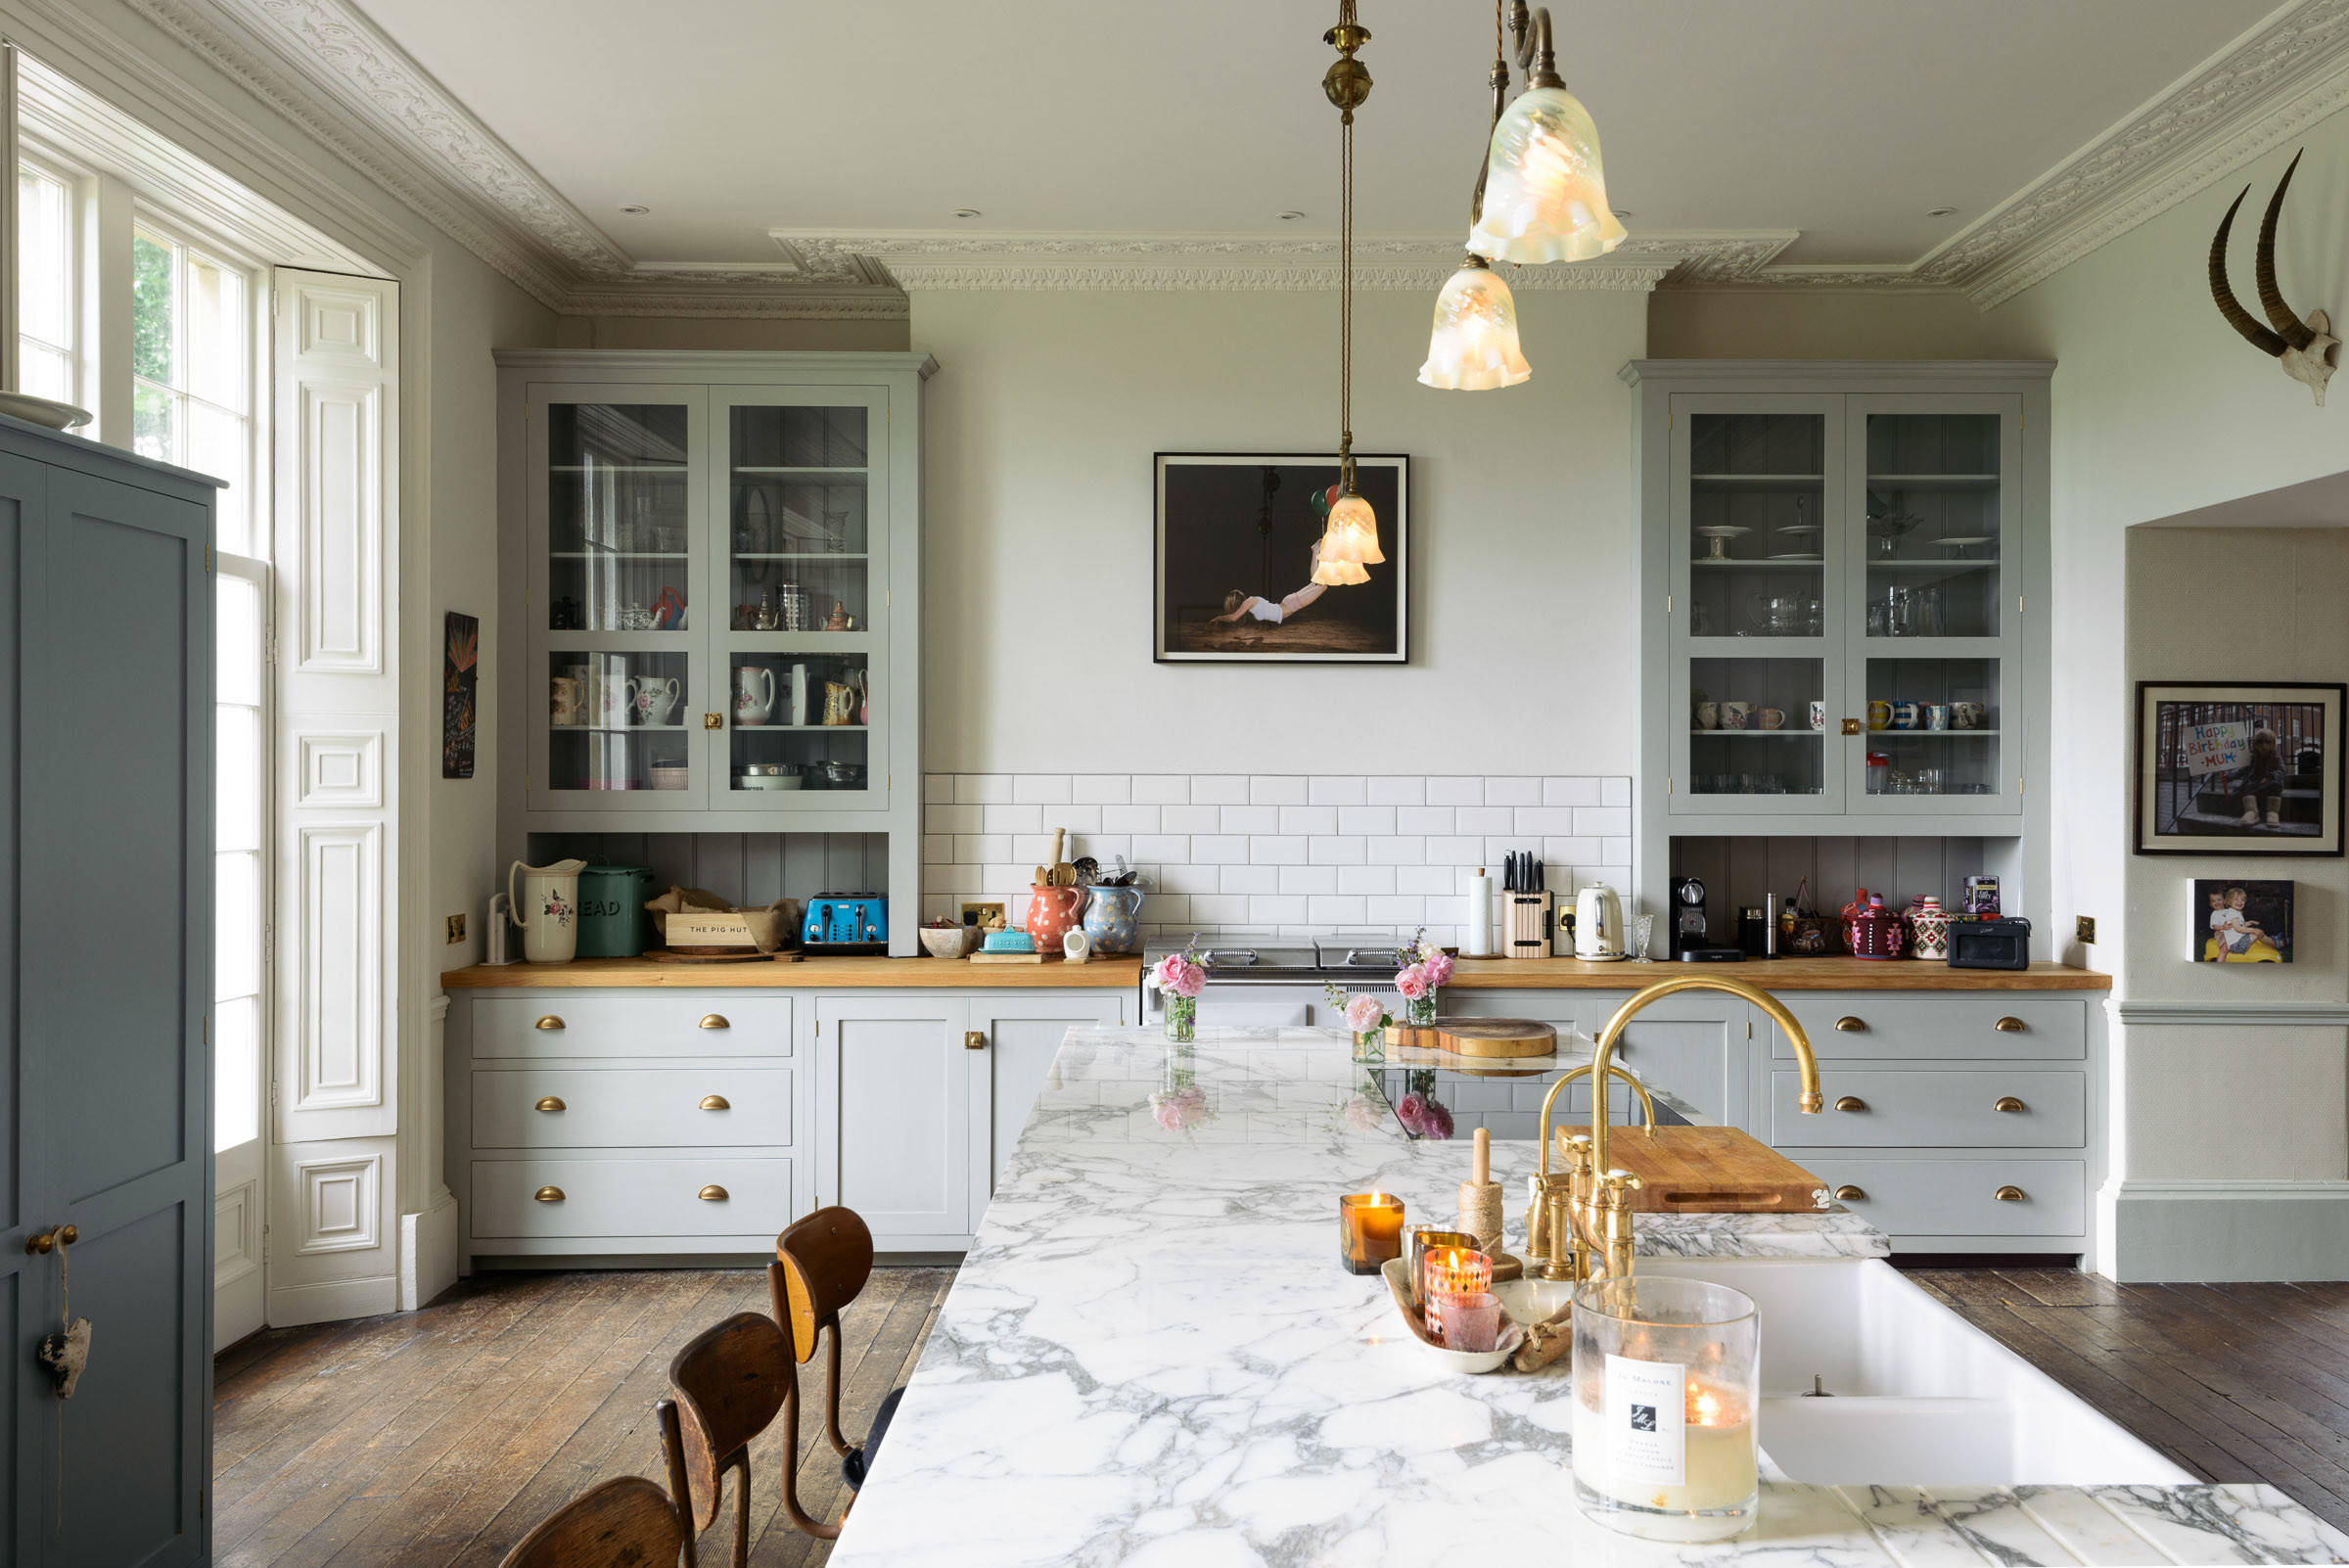 10 Ideas For Kitchen Cabinets That Sit